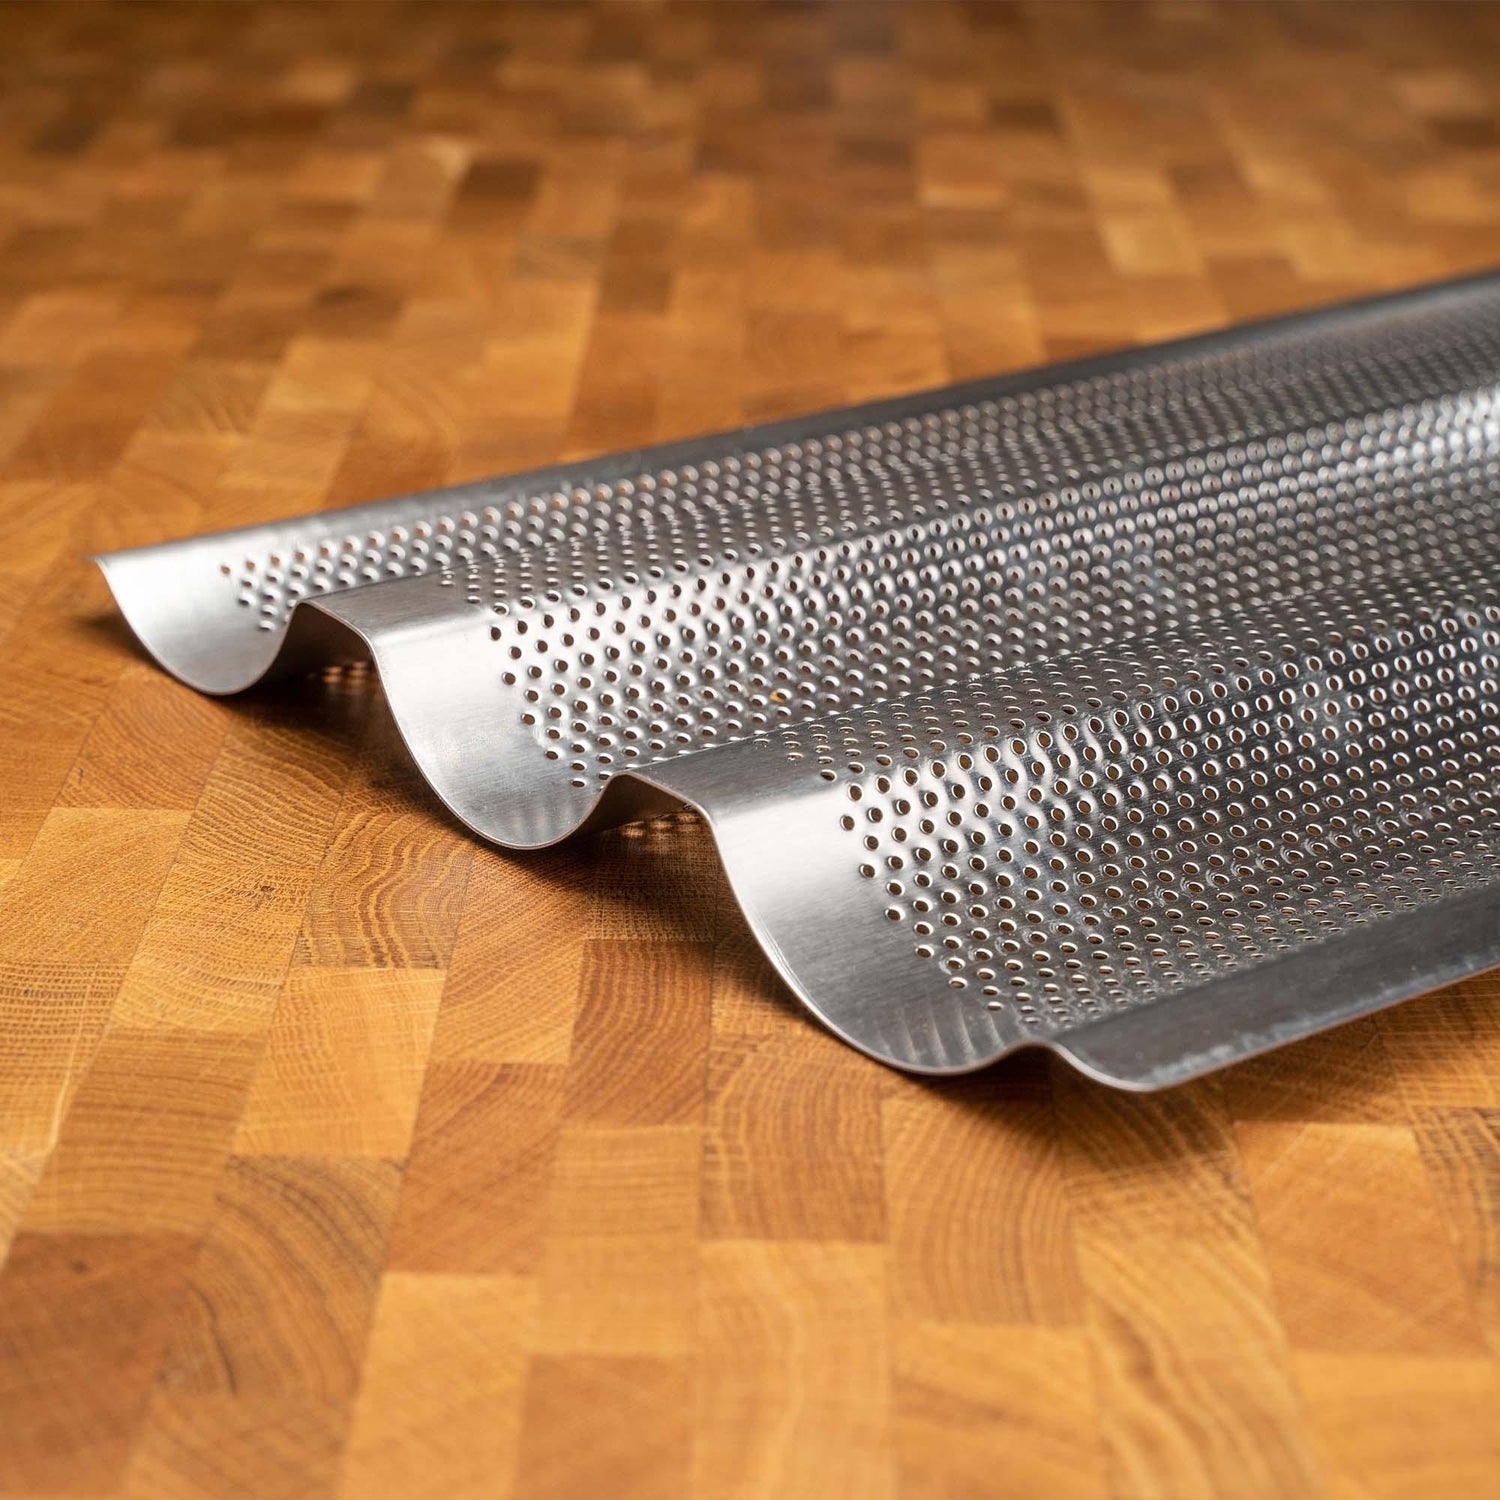 Baguette baking sheet made of stainless stainless steel for oven and grill